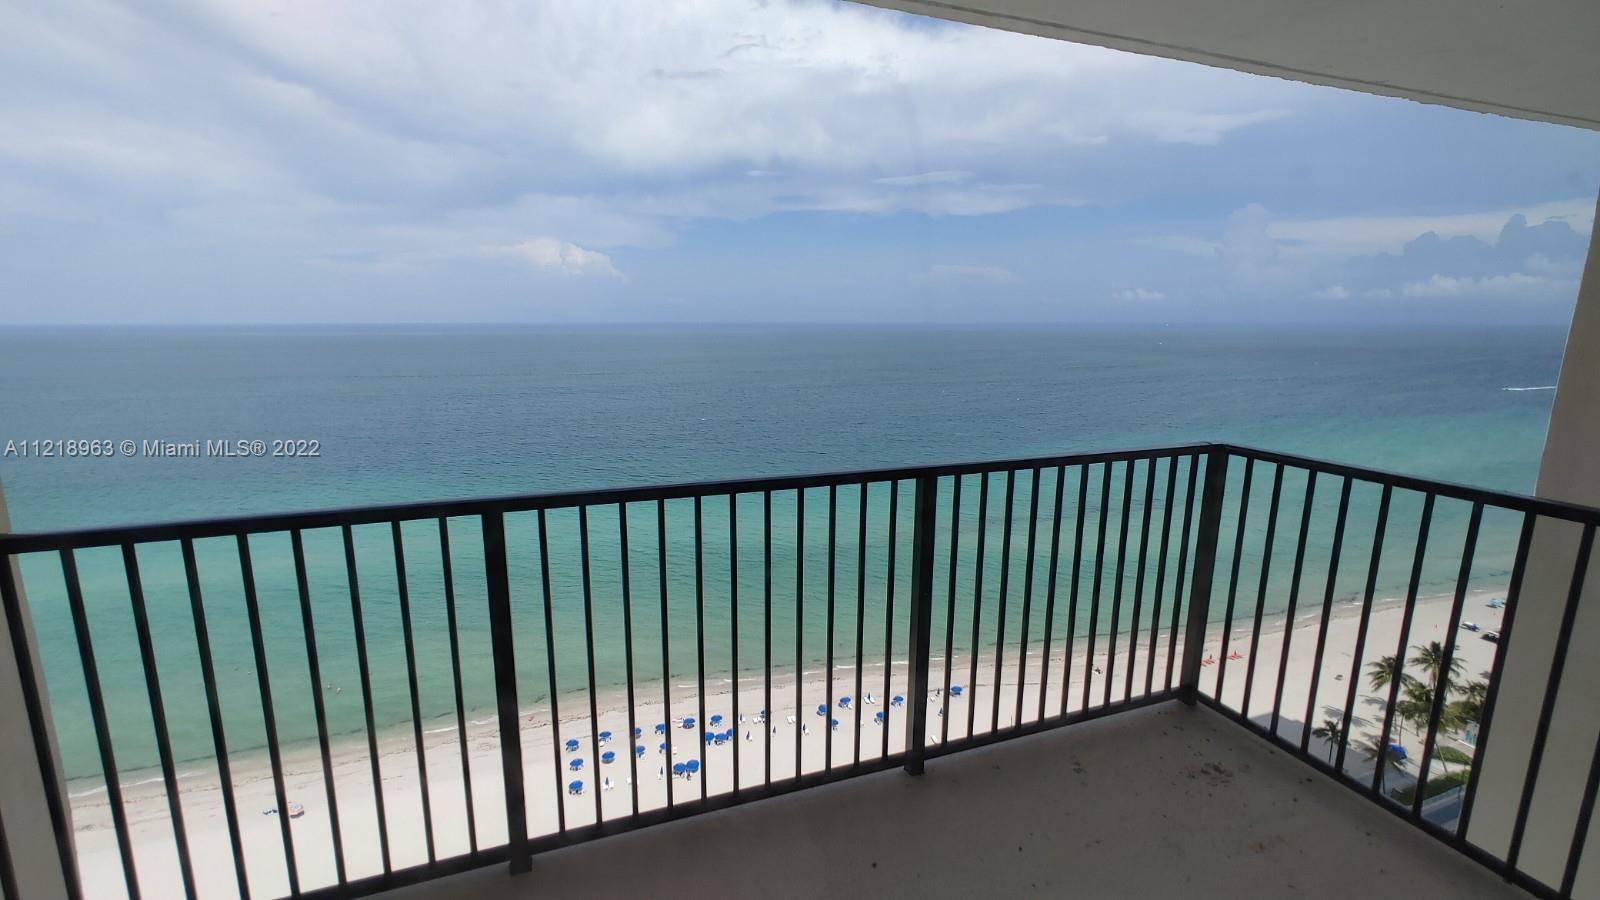 DIRECT OCEAN VIEW. FULLY REMODELED AND FURNISHED UNIT. Bring your toothbrush and enjoy the ocean. Bu